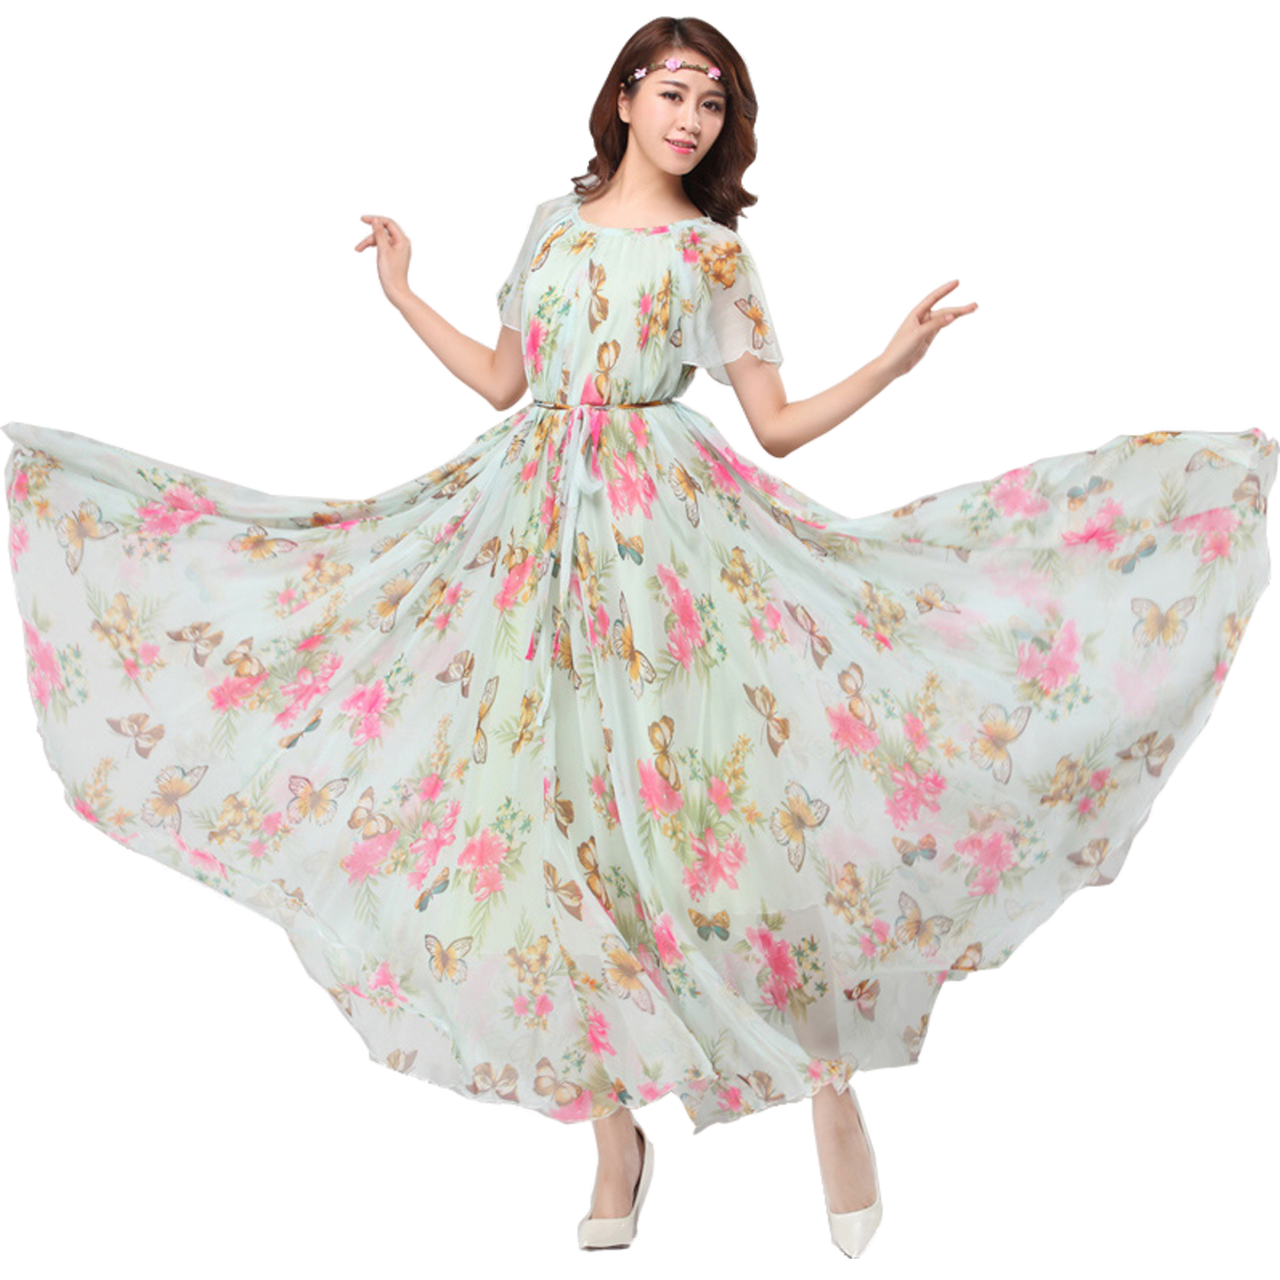 Chiffon Butterfly Sleeves Bridesmaid Holiday Beach Floral Maxi Dress Plus Size Sundress